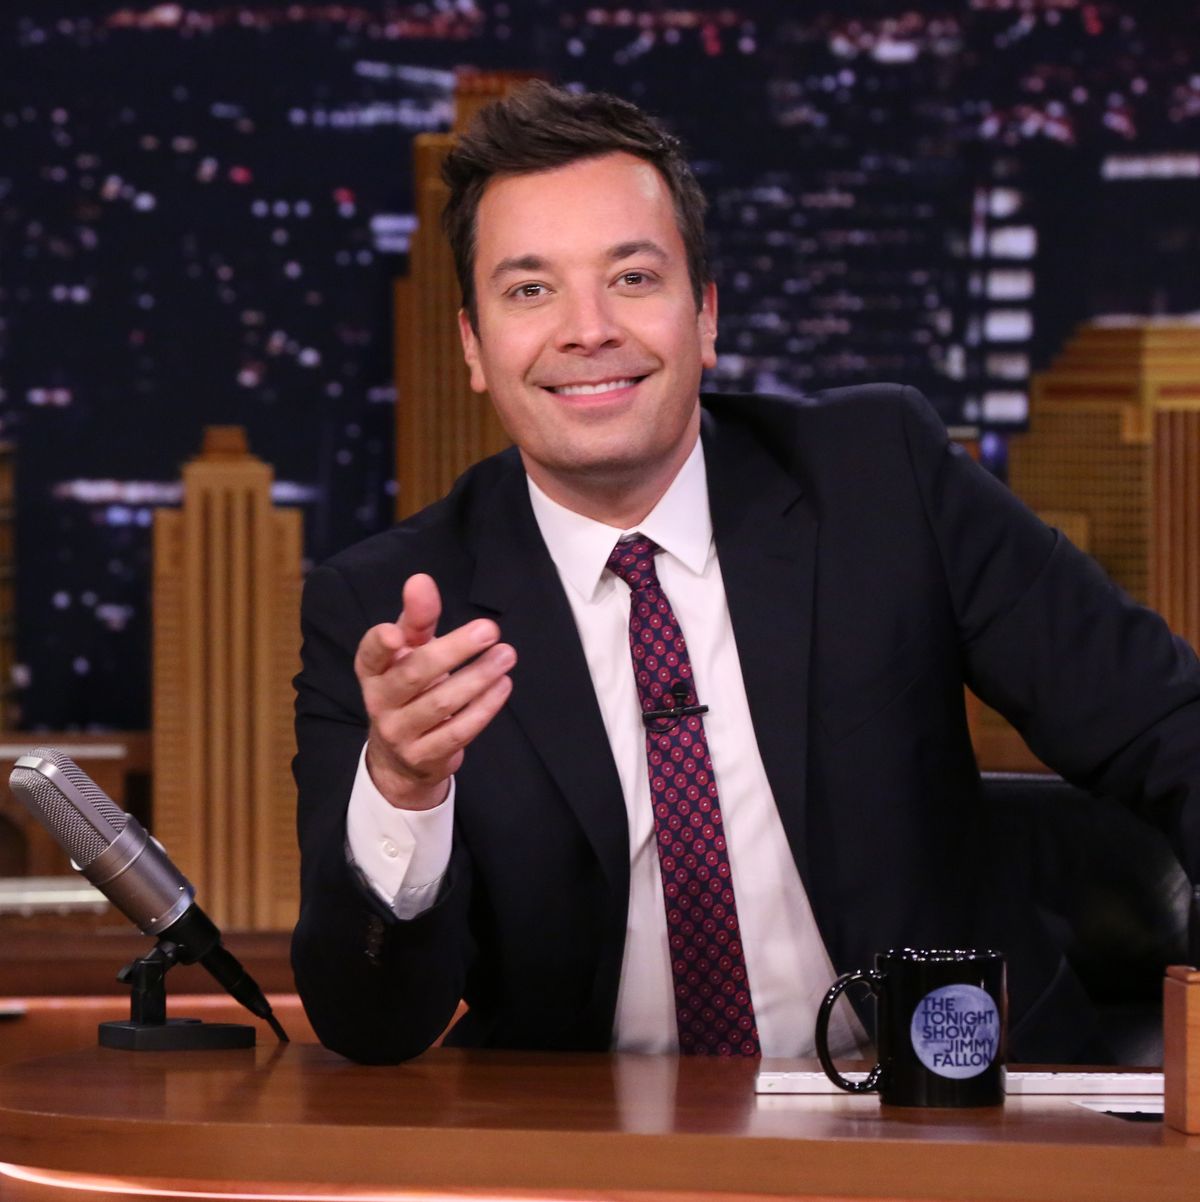 Jimmy Fallon Modeled for Calvin Klein Before 'The Tonight Show'